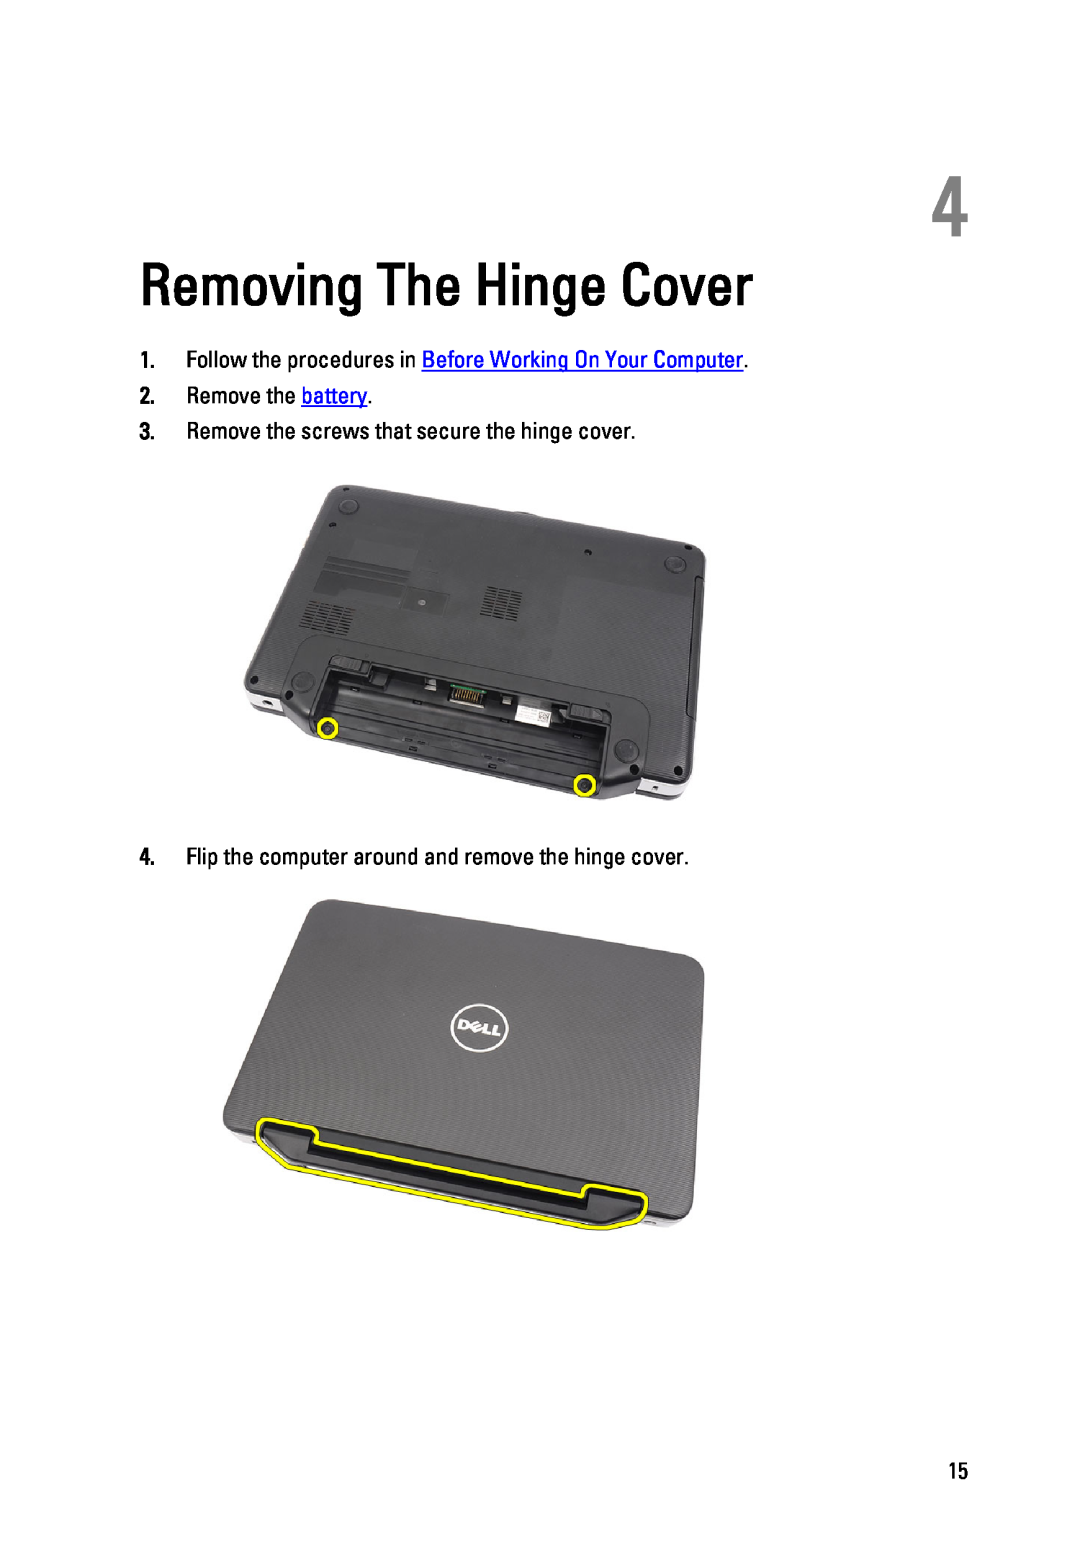 Dell P22G owner manual Removing The Hinge Cover, Remove the battery, Remove the screws that secure the hinge cover 